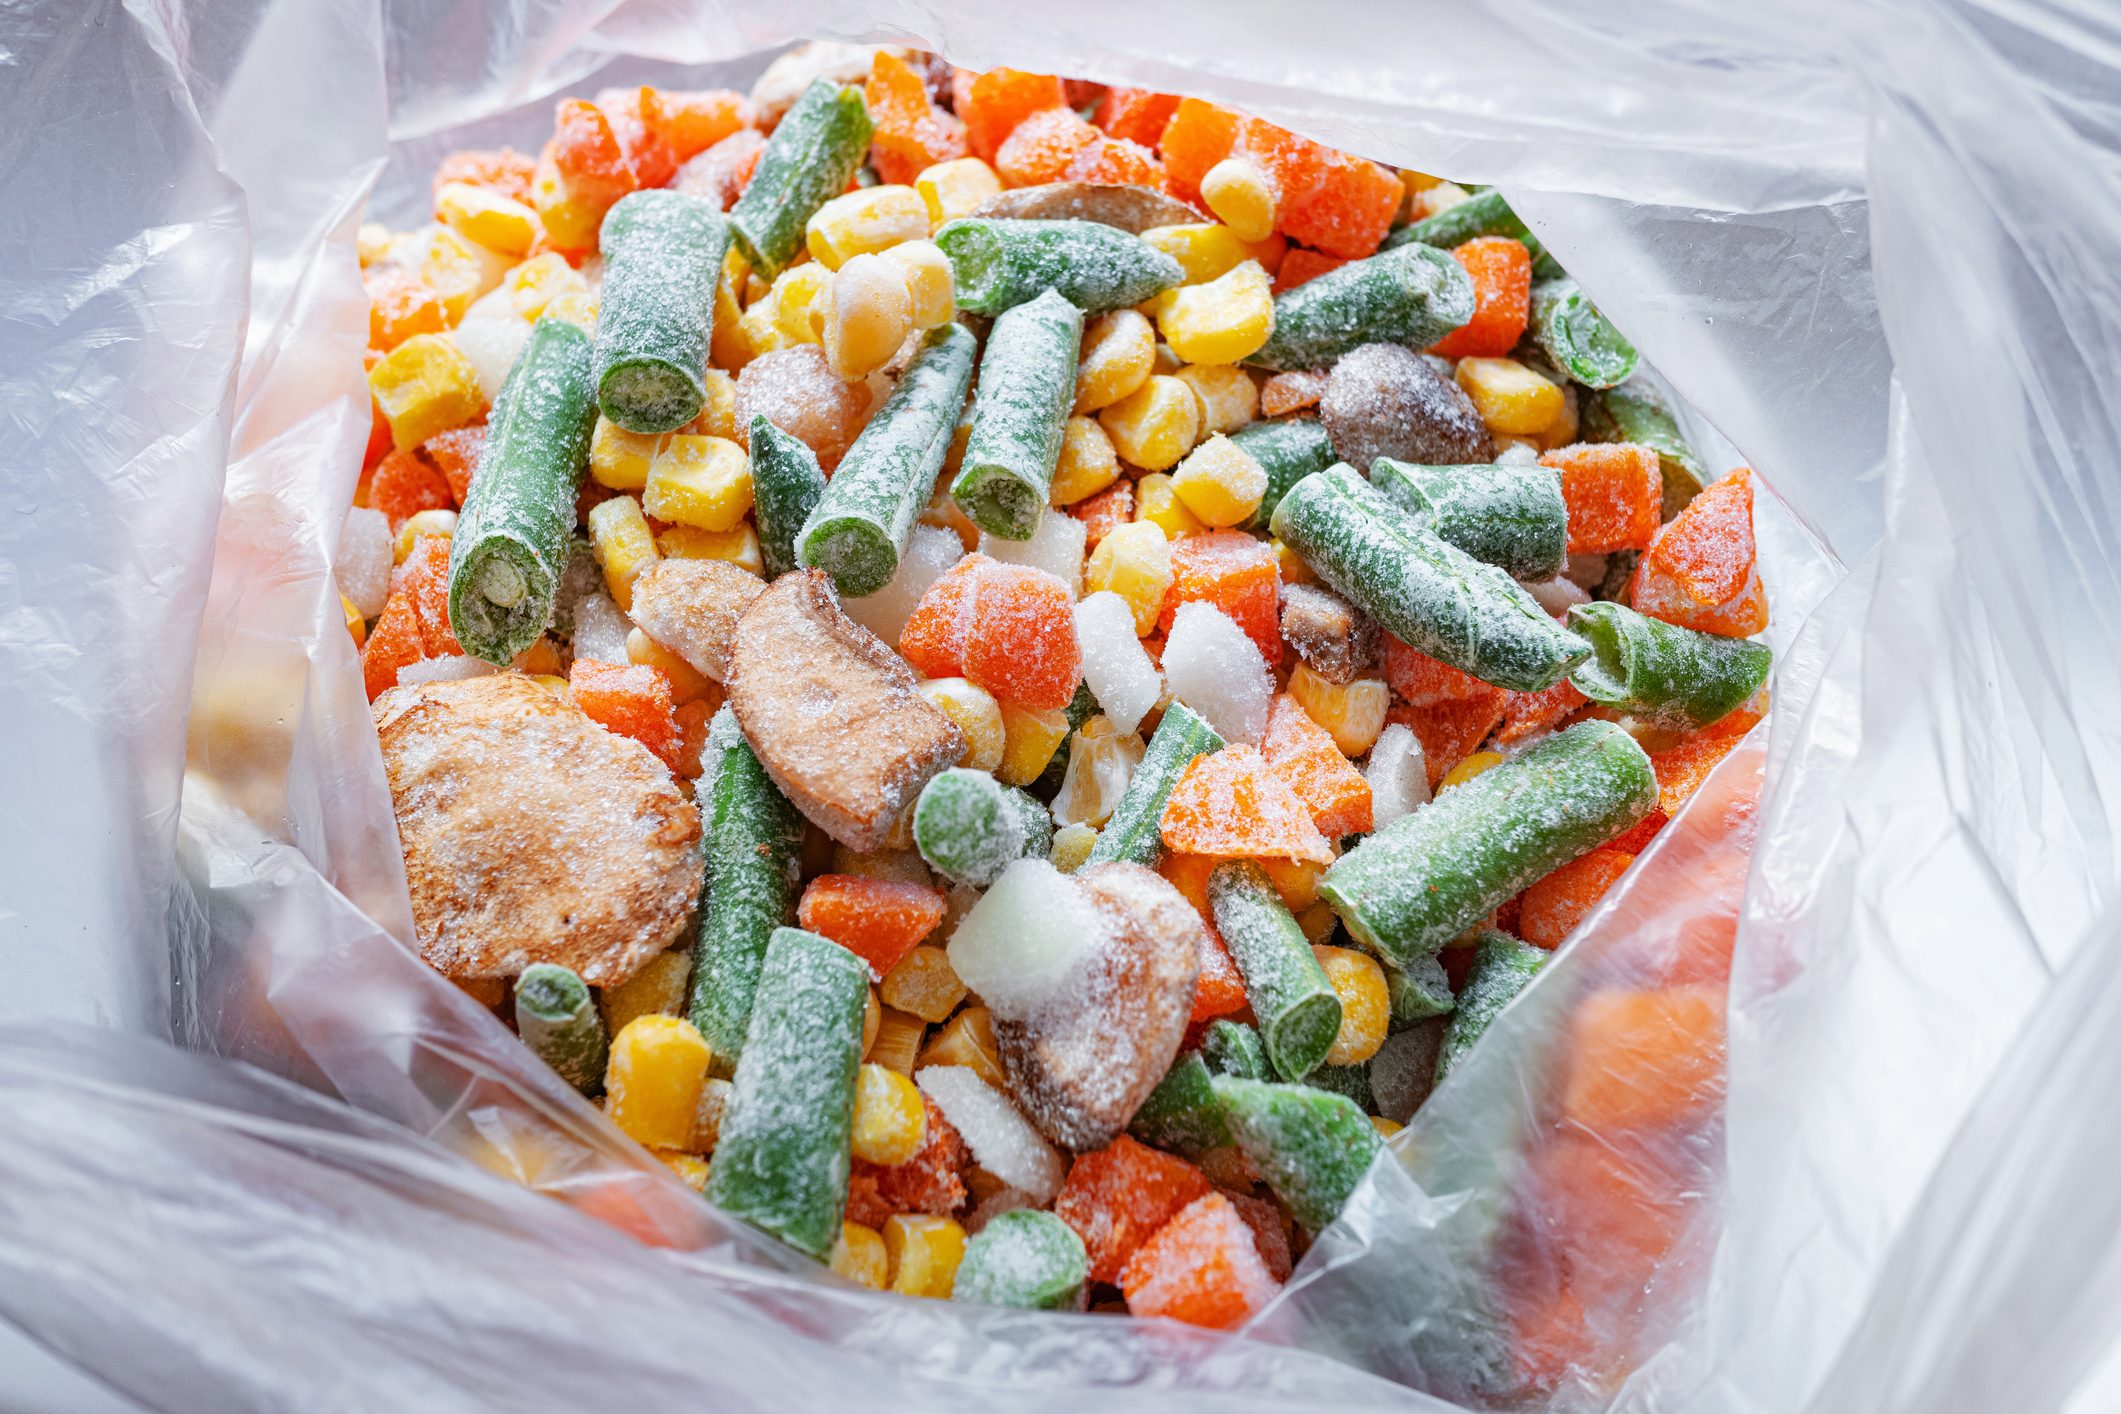 Frozen mixed vegetables in a bag